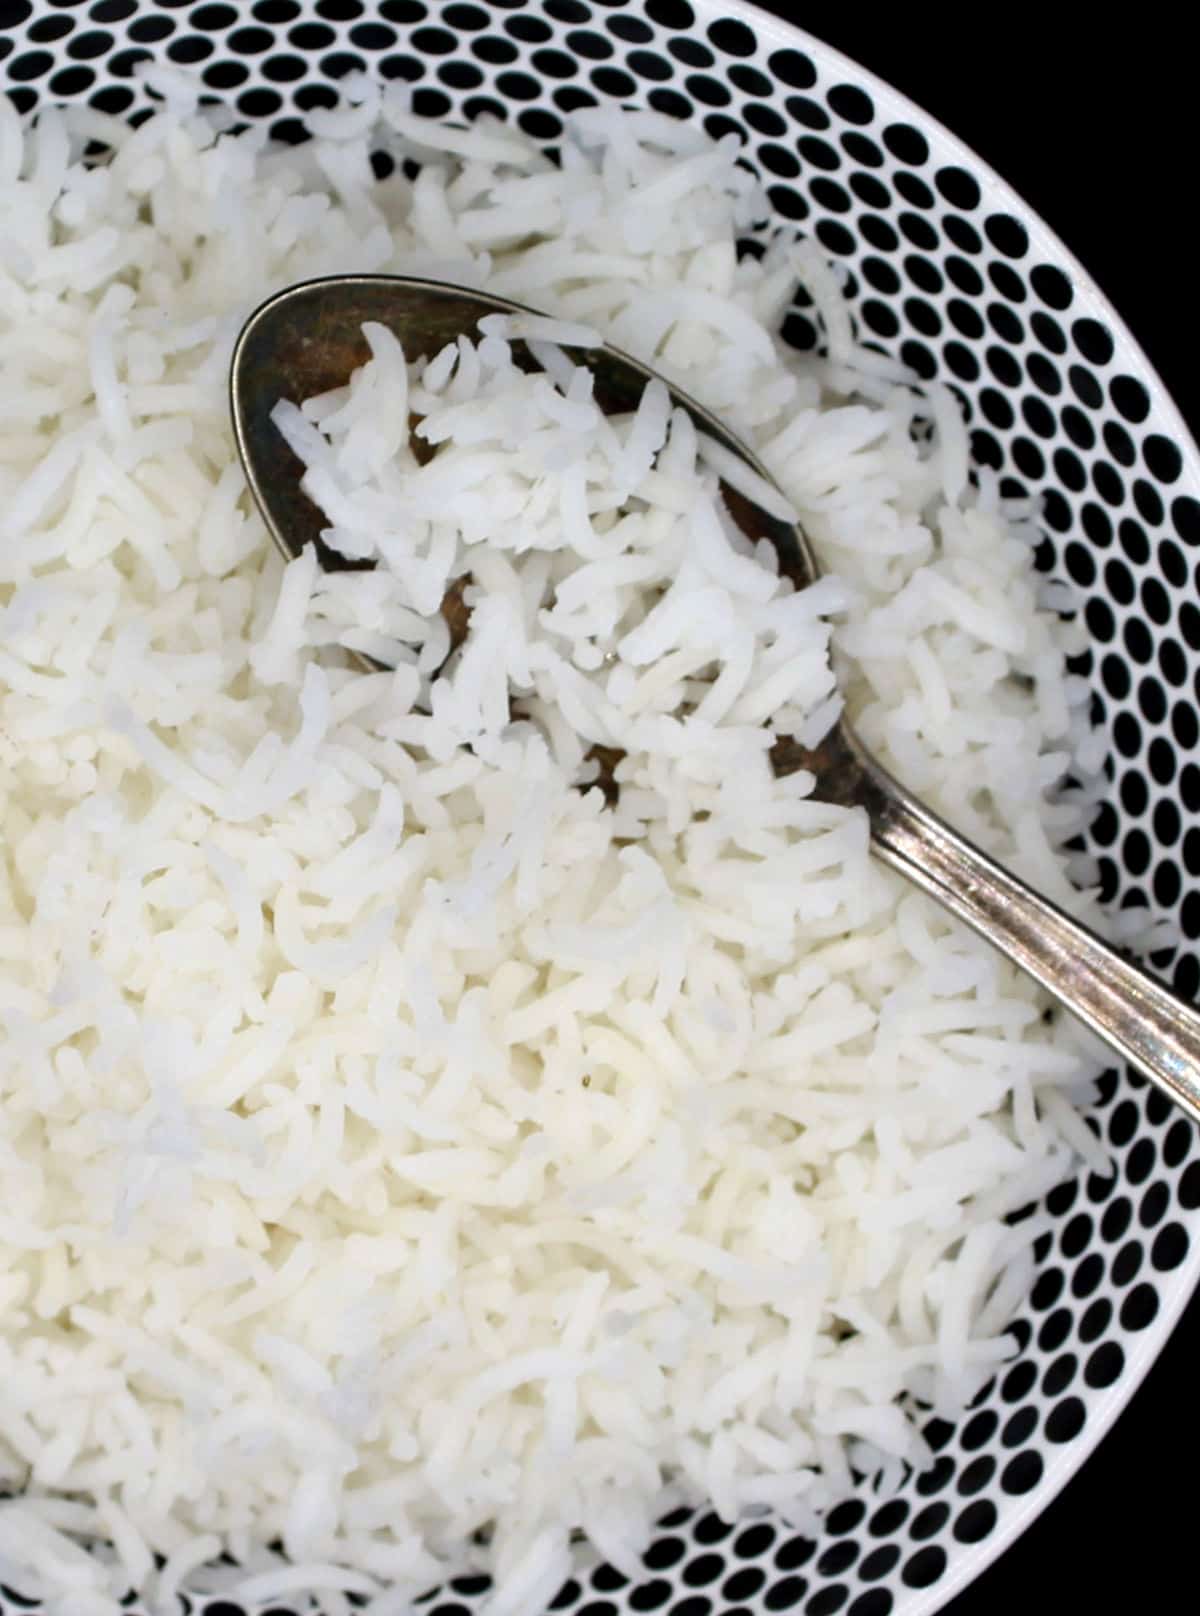 Long grains of cooked basmati rice in black and white bowl with spoon.